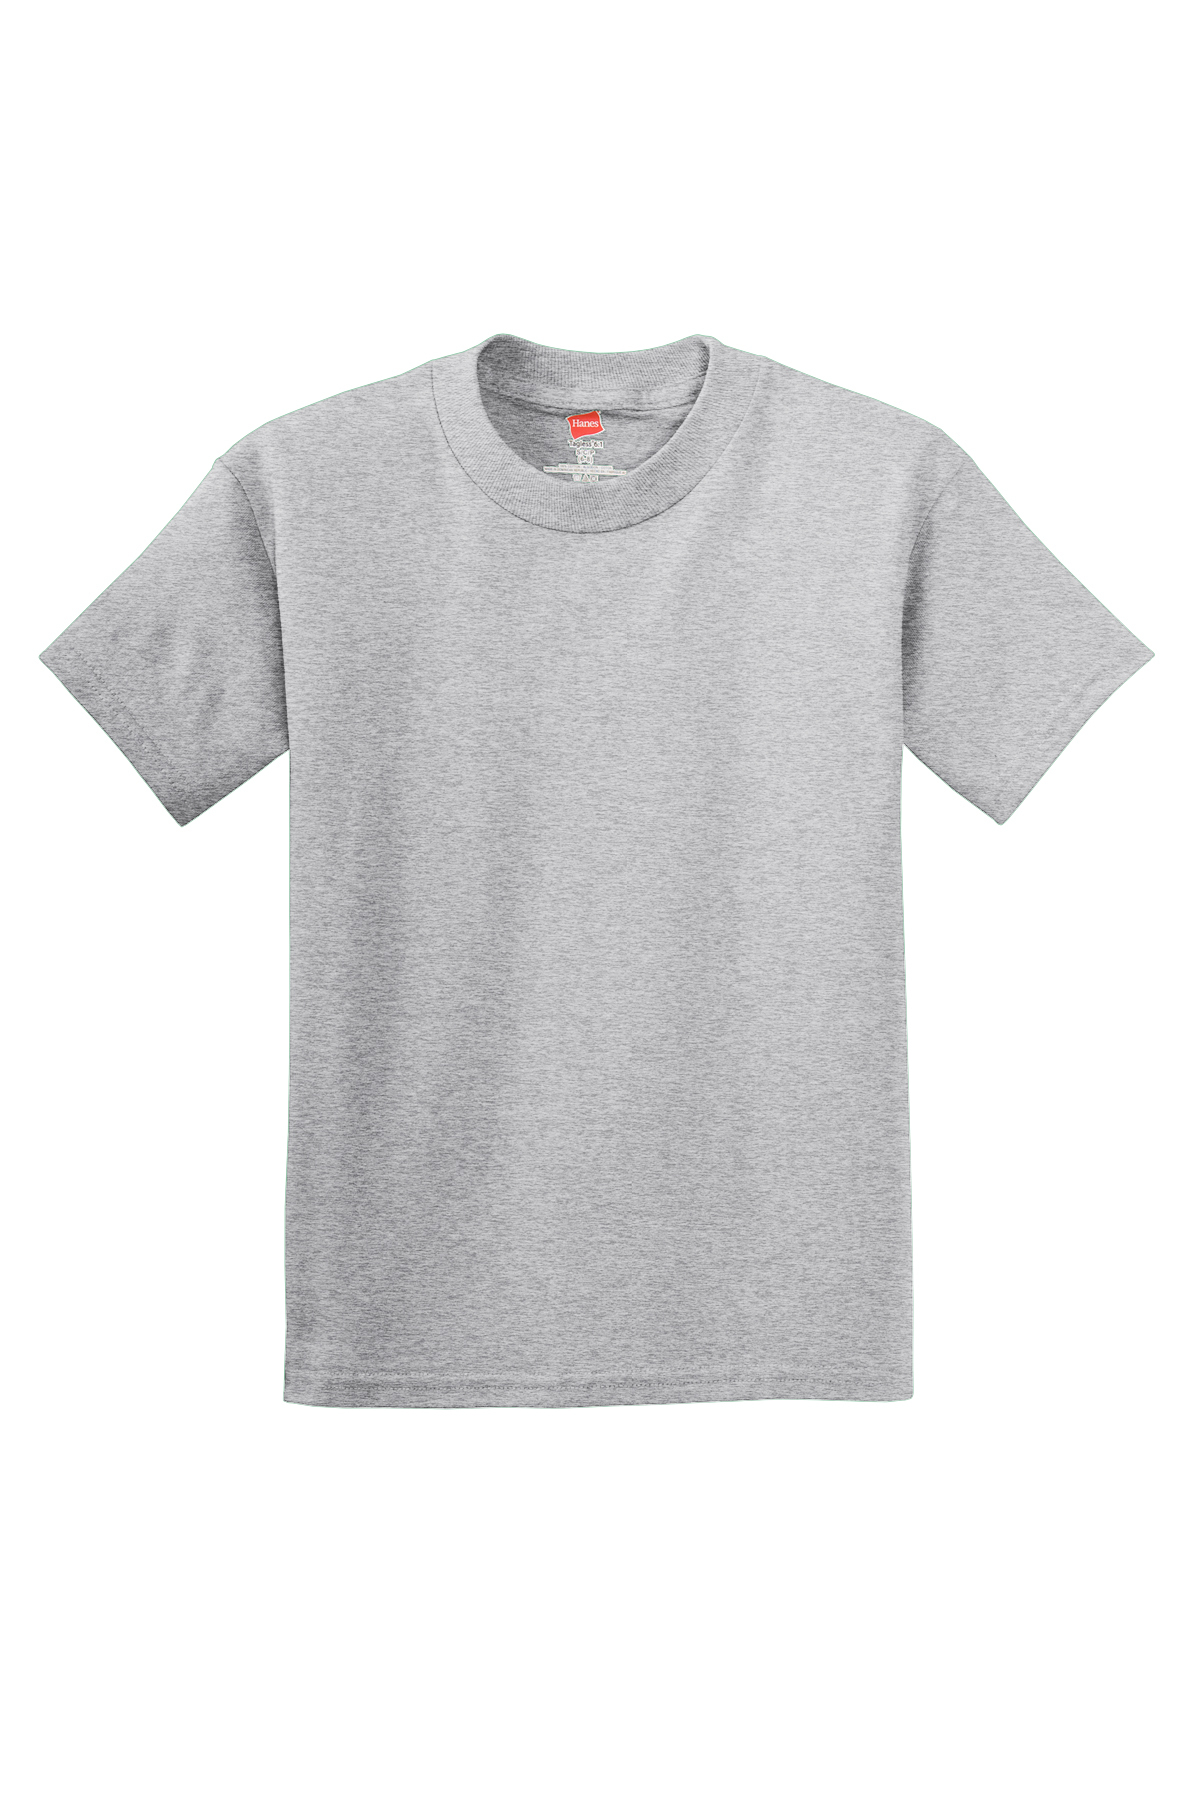 Hanes - Youth Authentic 100% Cotton T-Shirt | Product | Sanmar